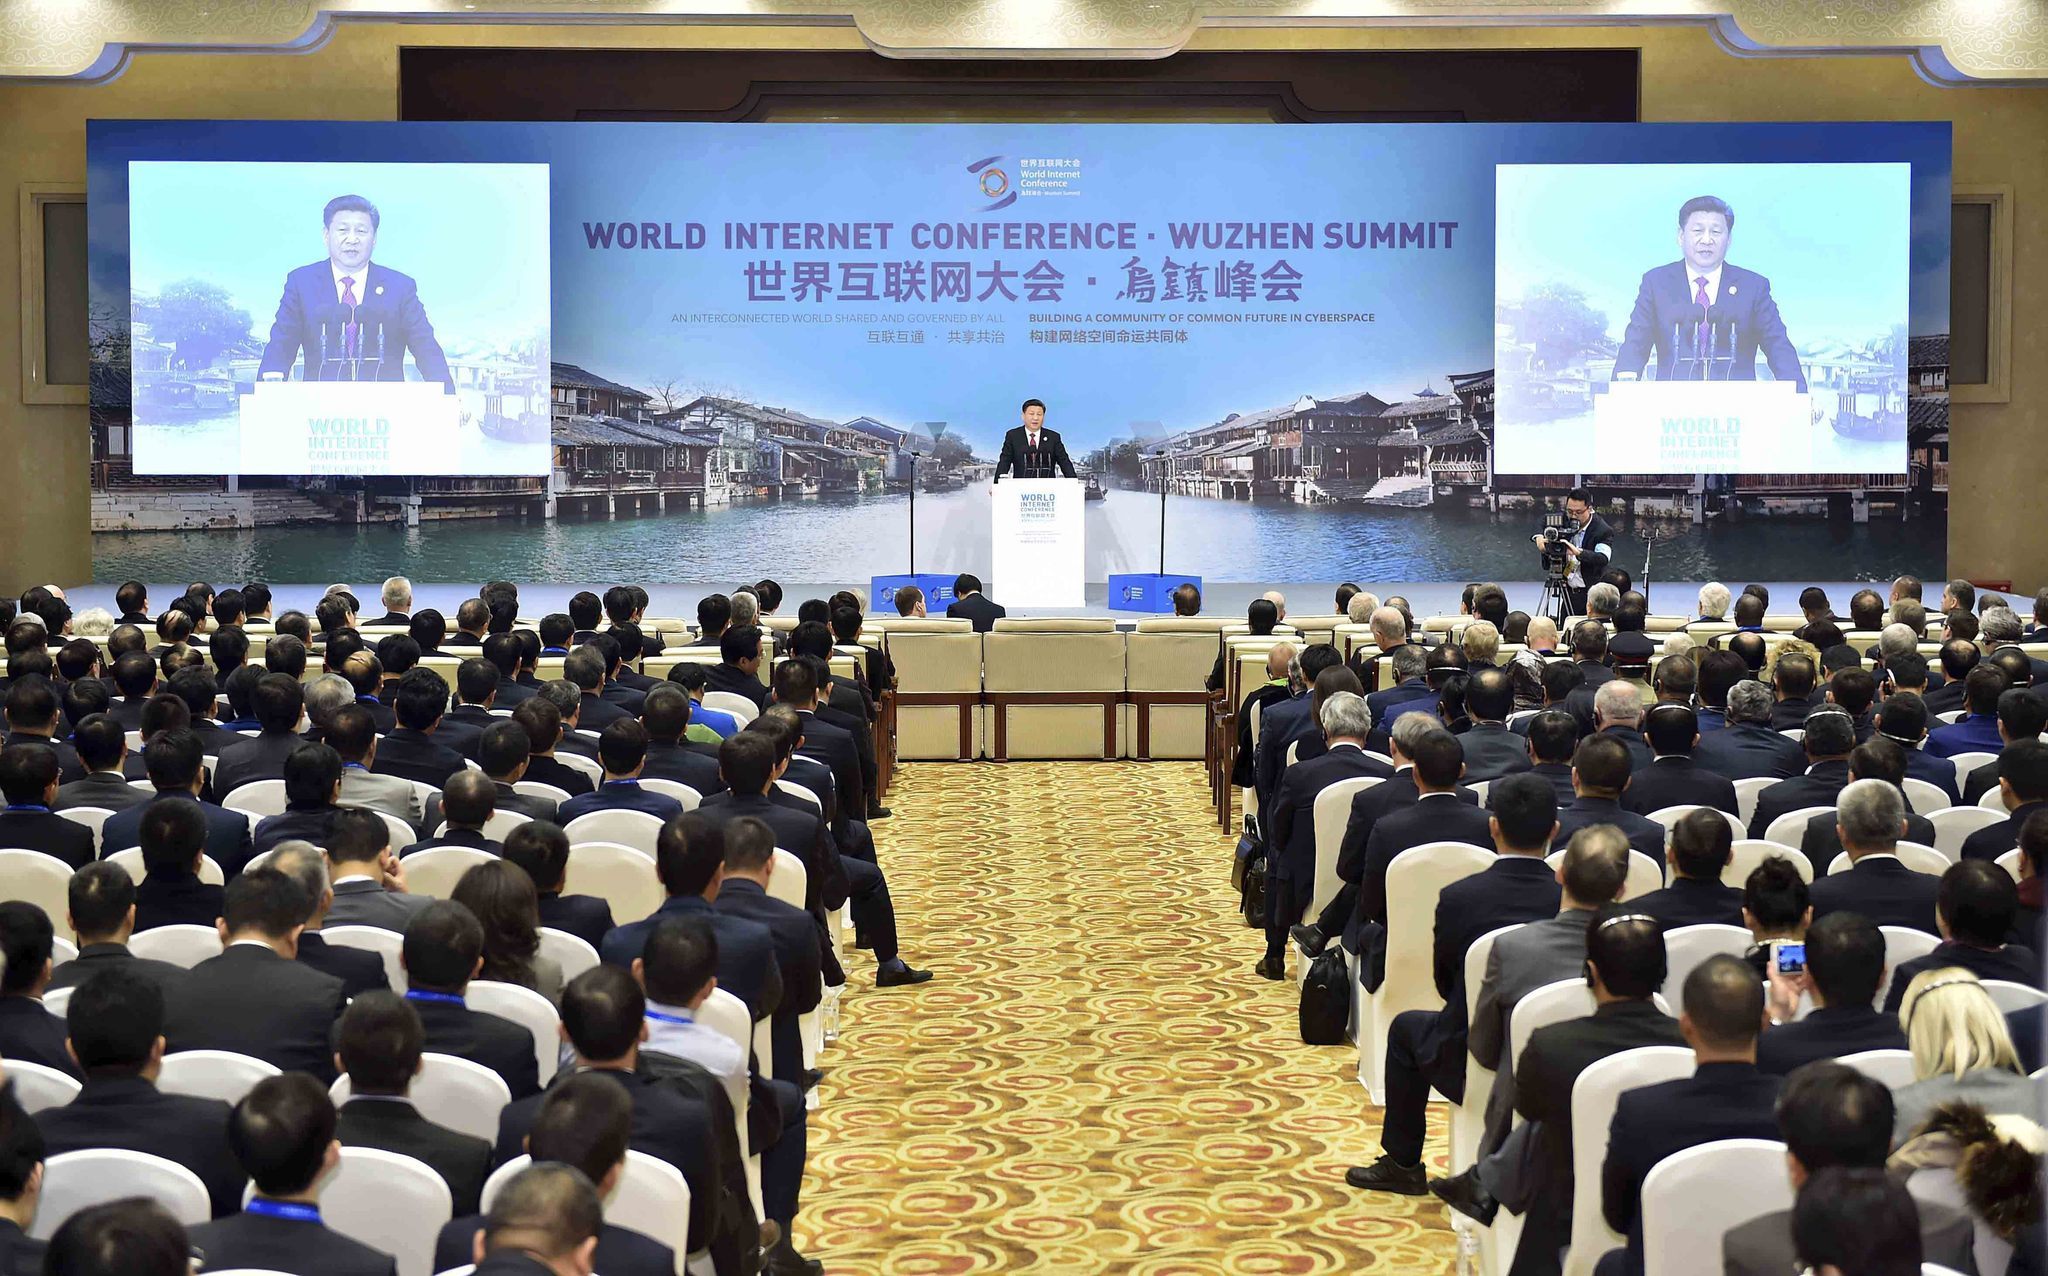 Five examples of internet changing lives showcased at the China Internet Conference 13